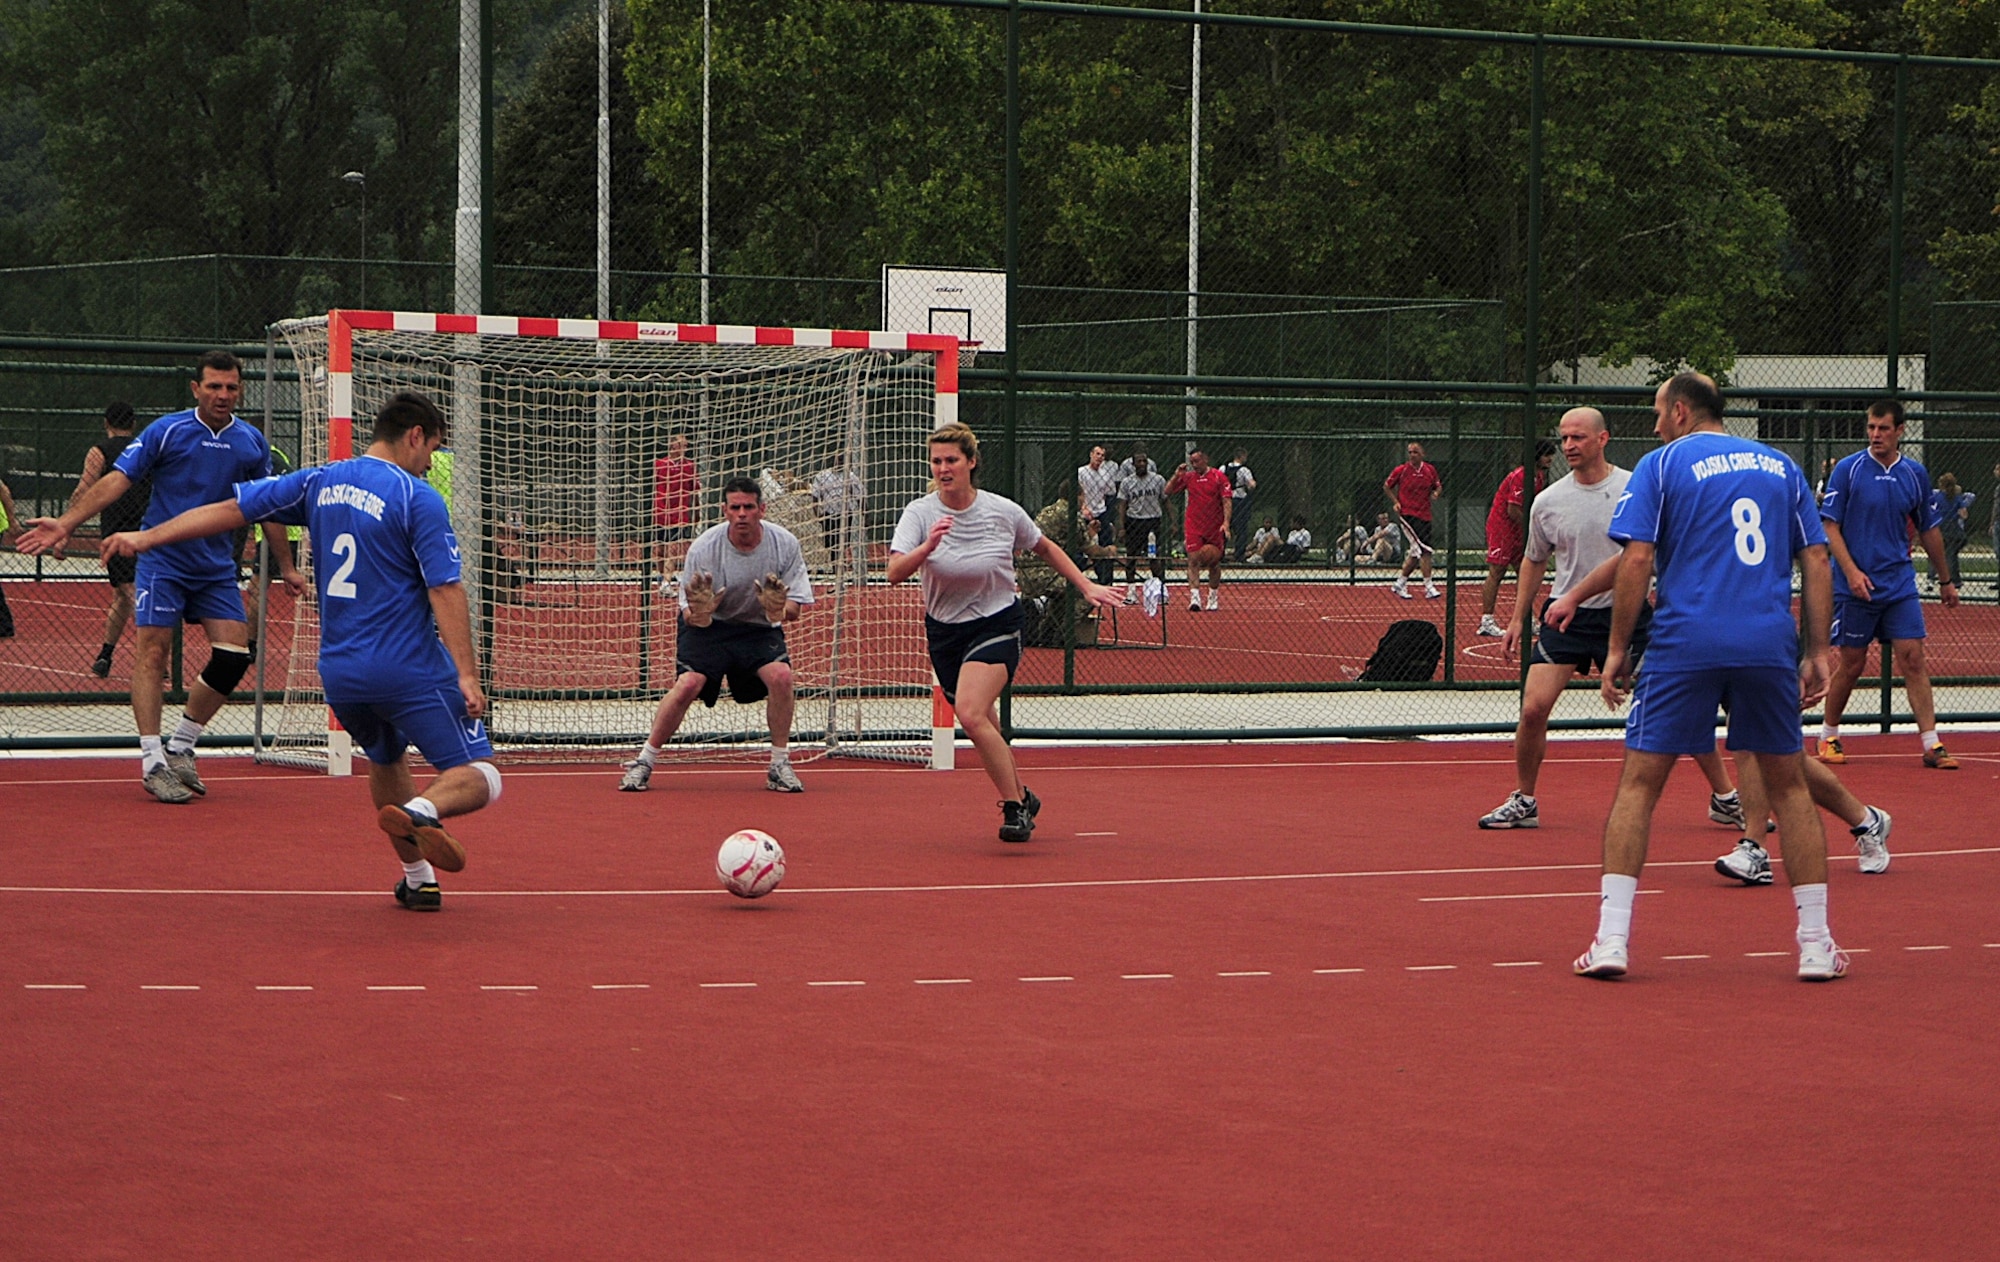 U.S. Air Force Airmen play a game of soccer against the Armed Forces of Montenegro during the MEDCEUR10 sports day at Danilovgrad Army Base, Montenegro, Sept. 12. Fitness is a key element in any military force and will assist the service members in MEDCEUR 10, a medical training exercise in central and eastern Europe. For more information, visit www.usafe.af.mil/medceur.asp and www.odbrana.gov.me. (U.S. Air Force photo/Airman 1st Class Tiffany Deuel)
